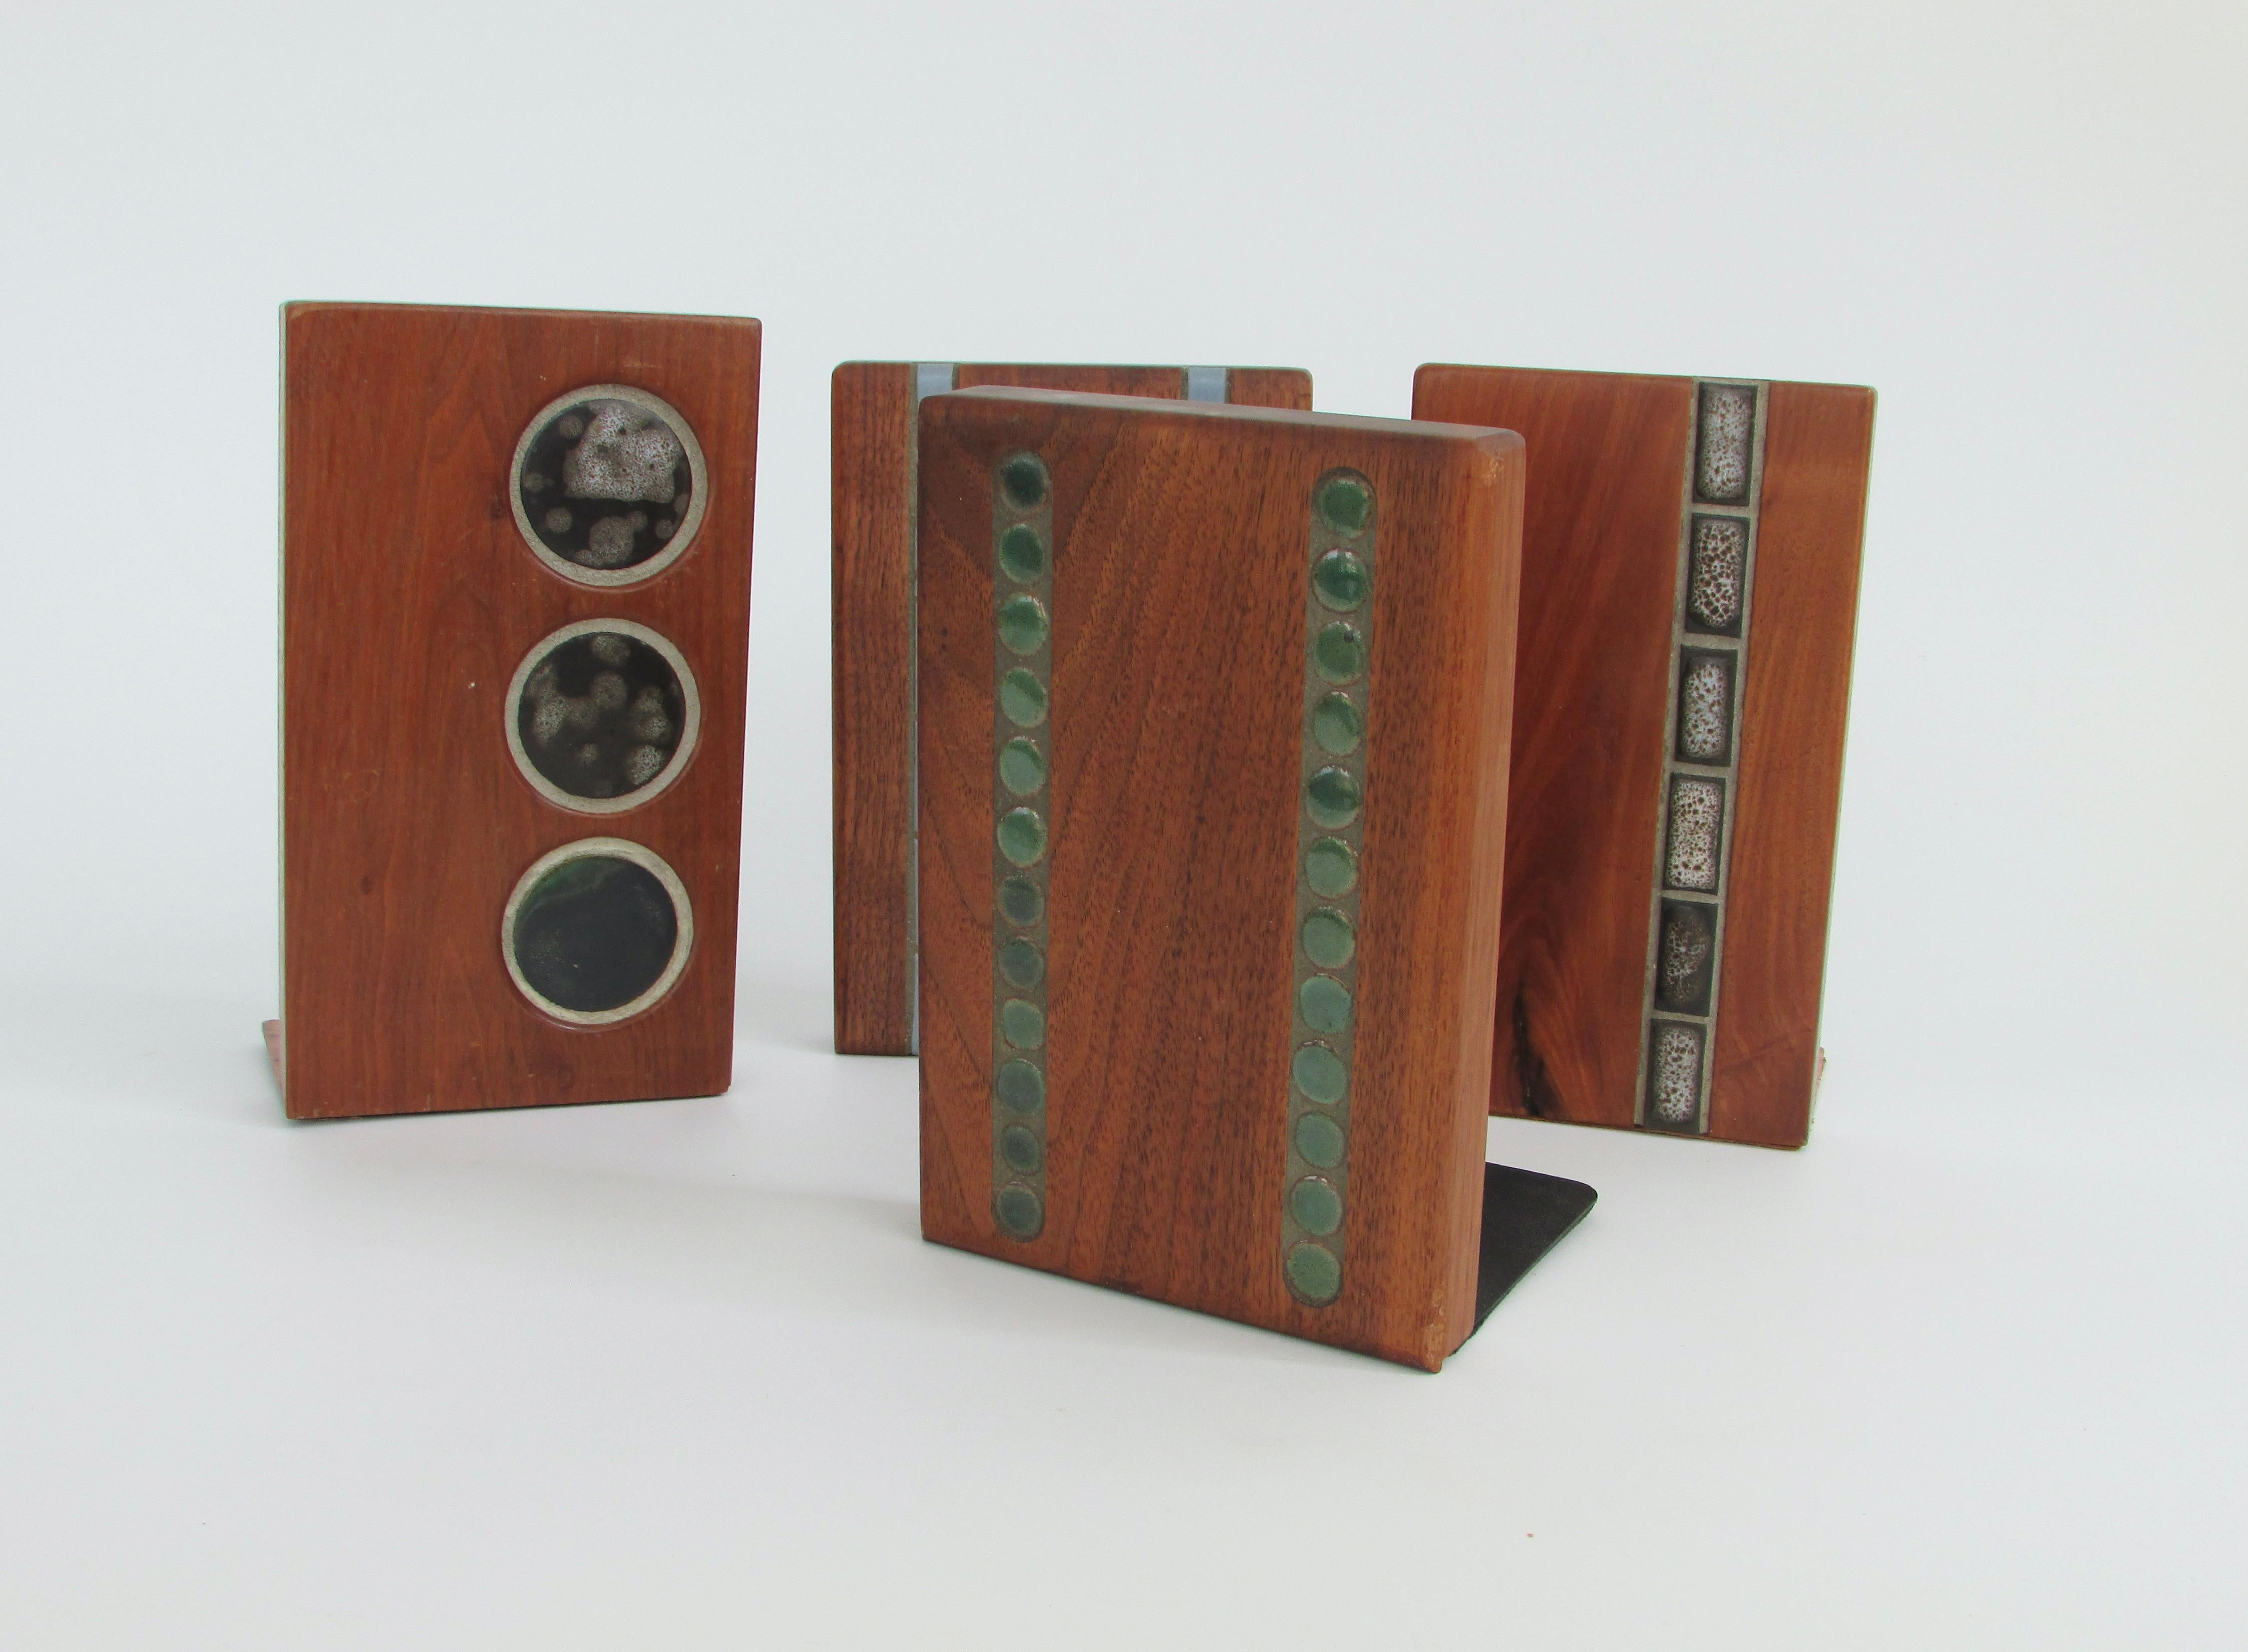 Instant collection priced separately . Four Gordon and Jane Martz bookends . Walnut slabs with four different tile insert designs that marts studio is so famous for . Measurements vary . Circle tile measures 4.5